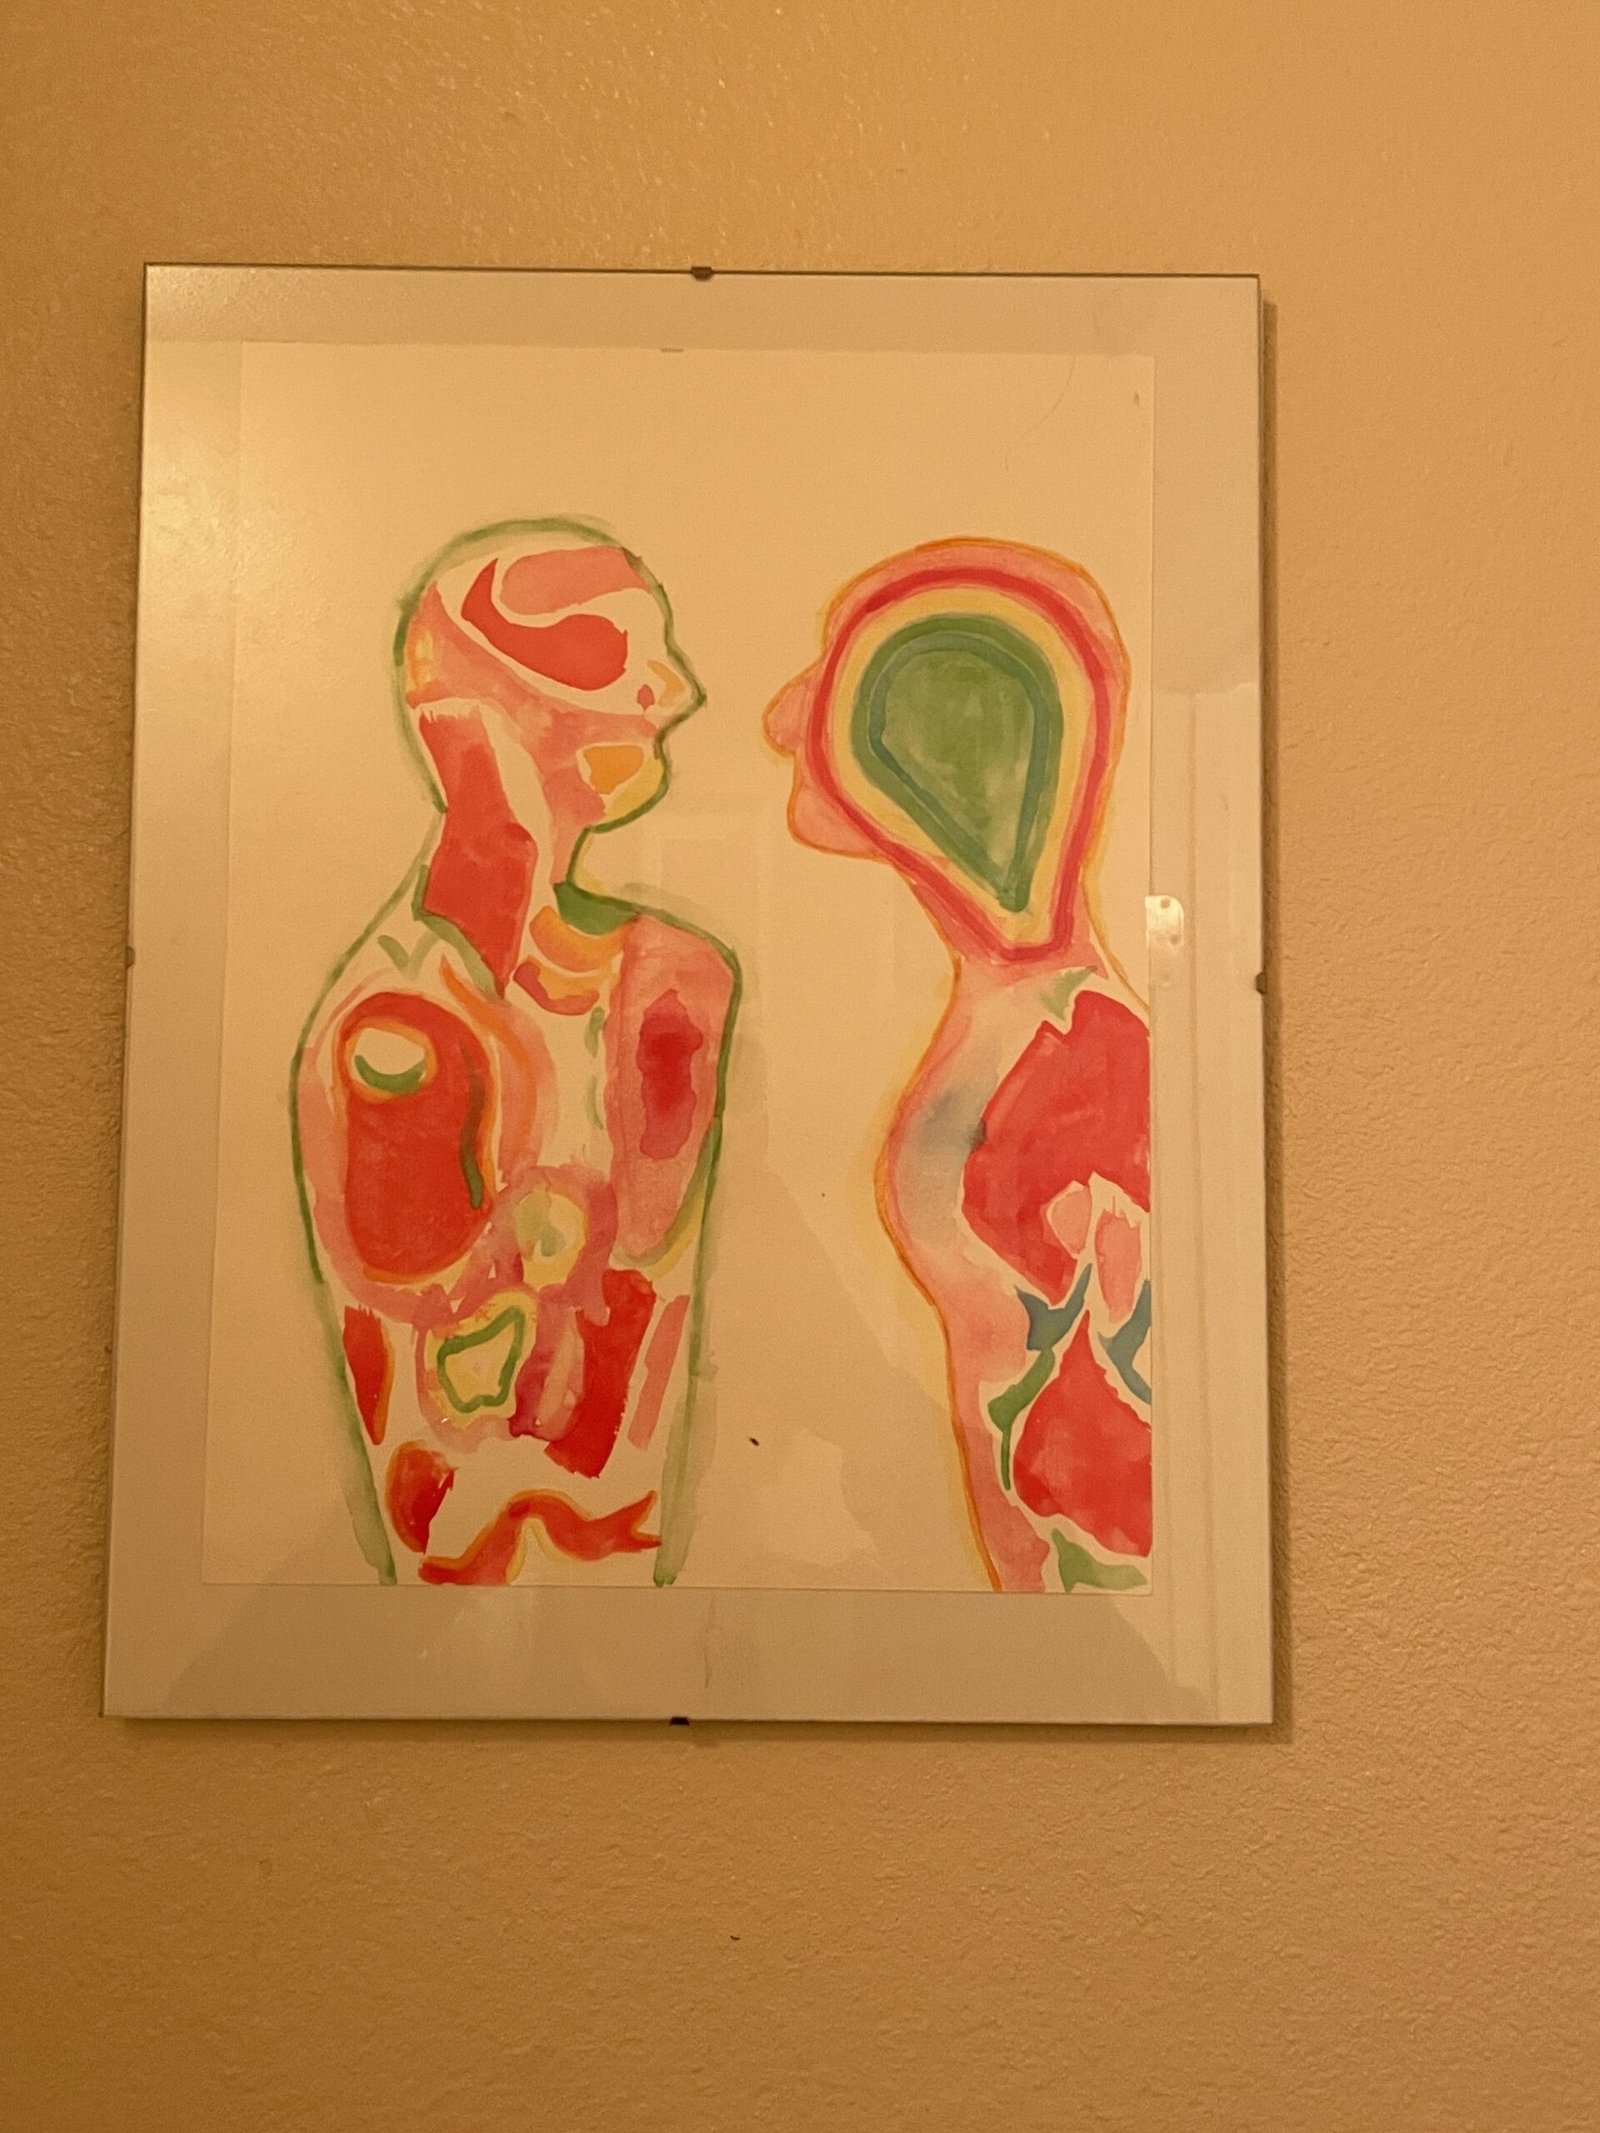 Watercolor painting of two human figures